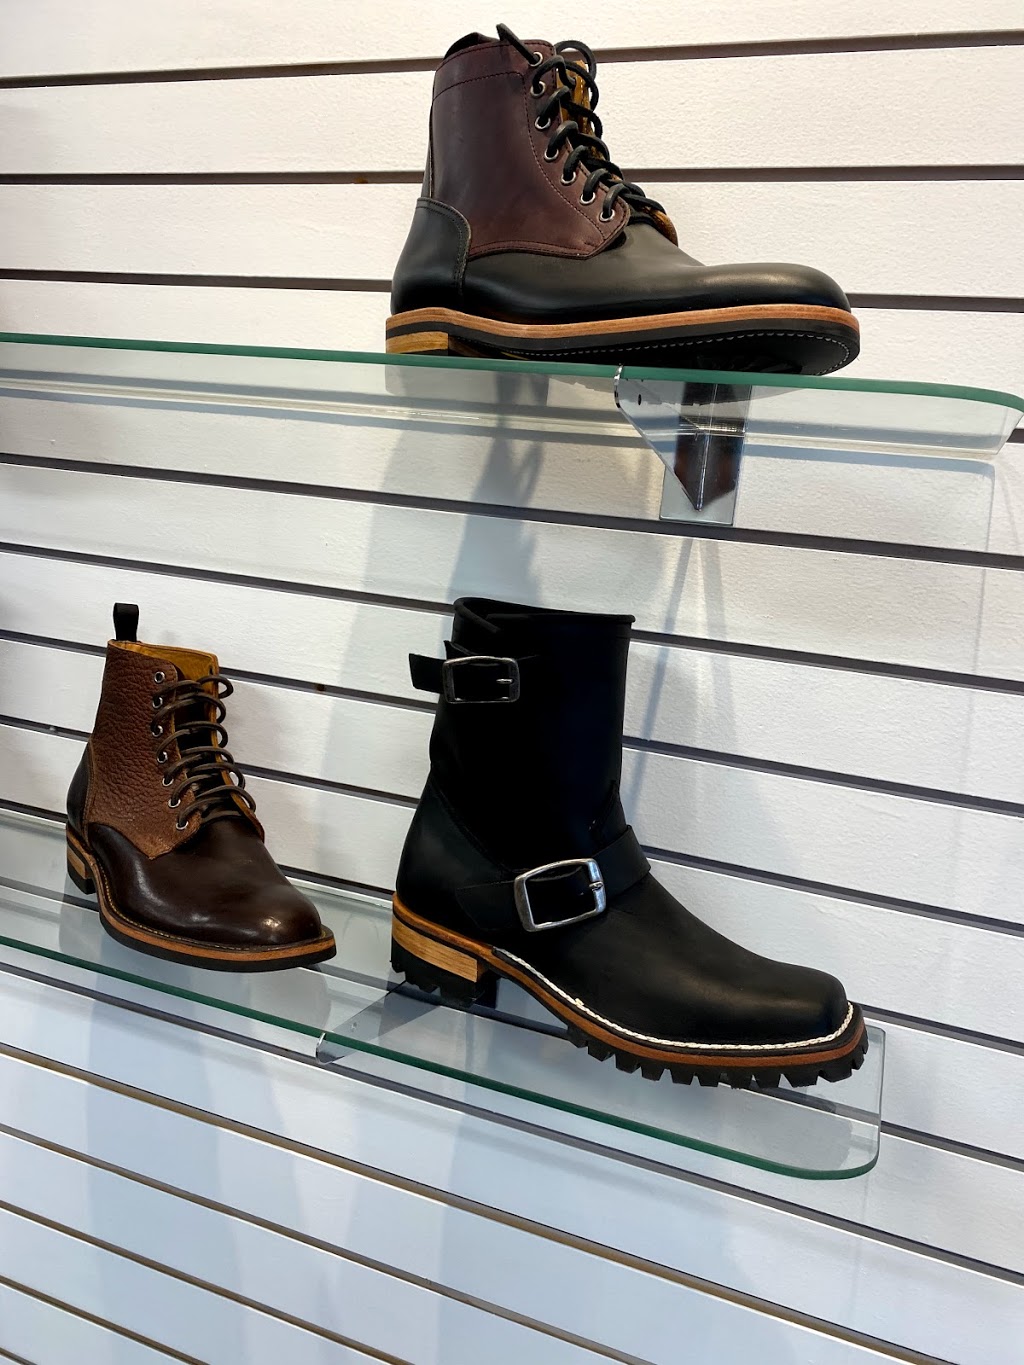 HD Russell Boots - 1687 Nanaimo St, Vancouver, BC V5L 4T9, Canada